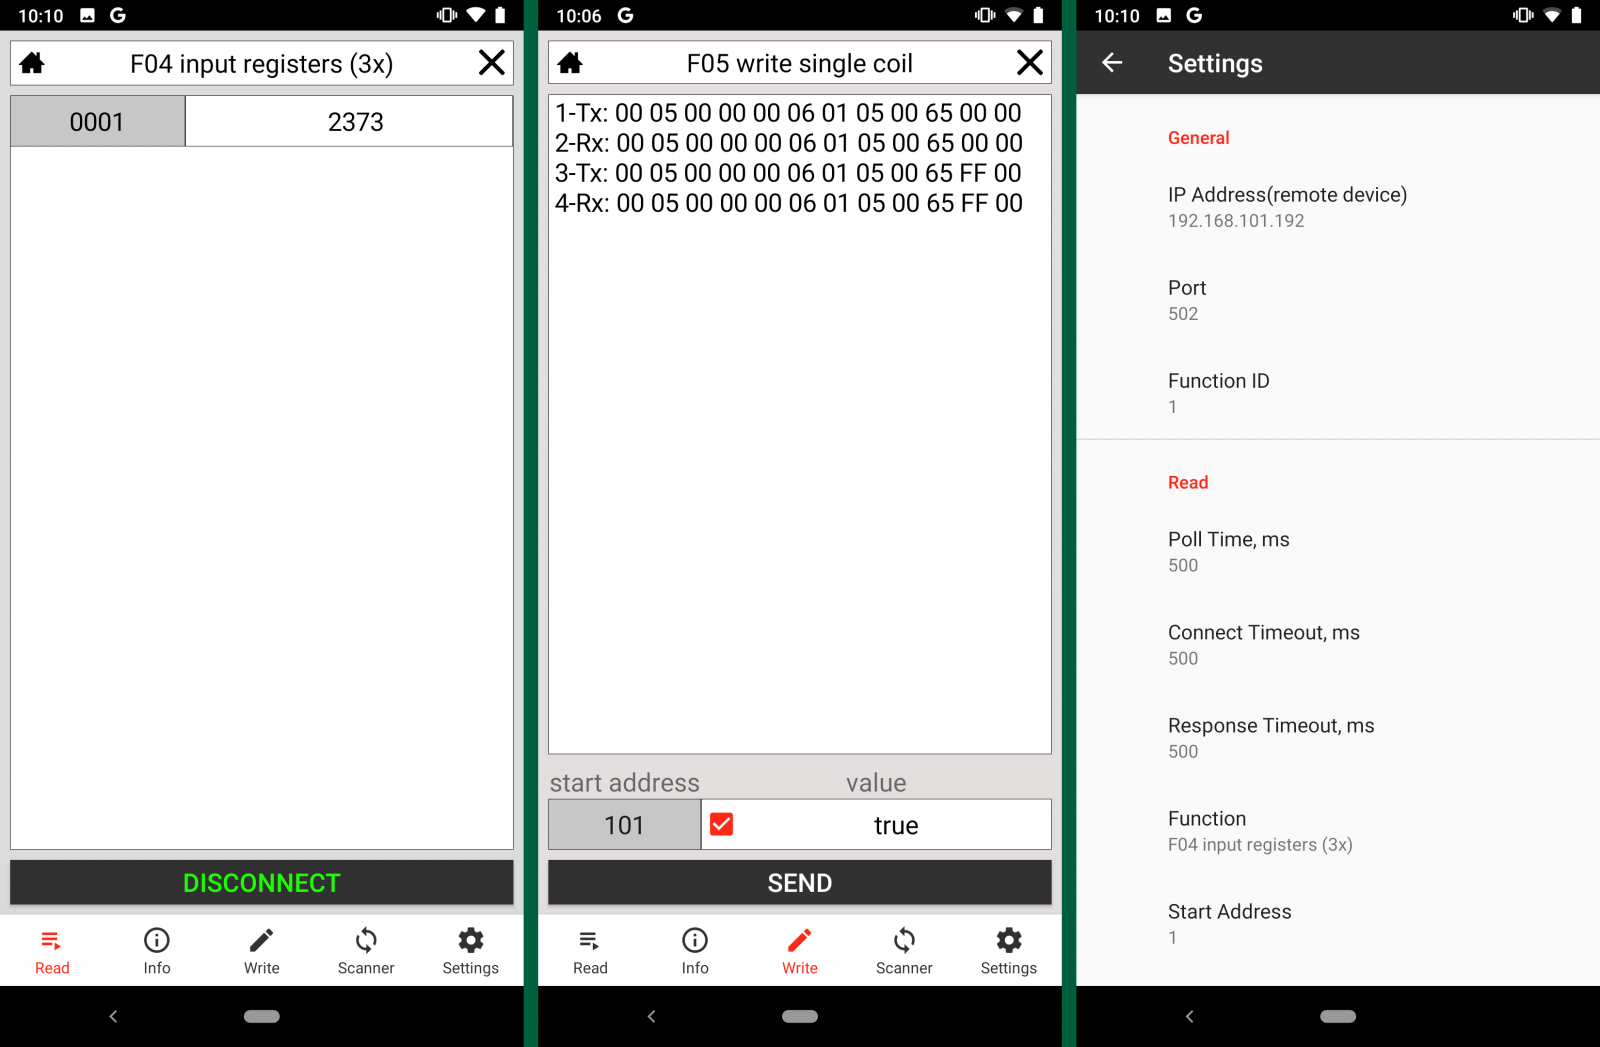 Screenshots of Modbus Viewer, android app for controlling NETIO networked smart power sockets